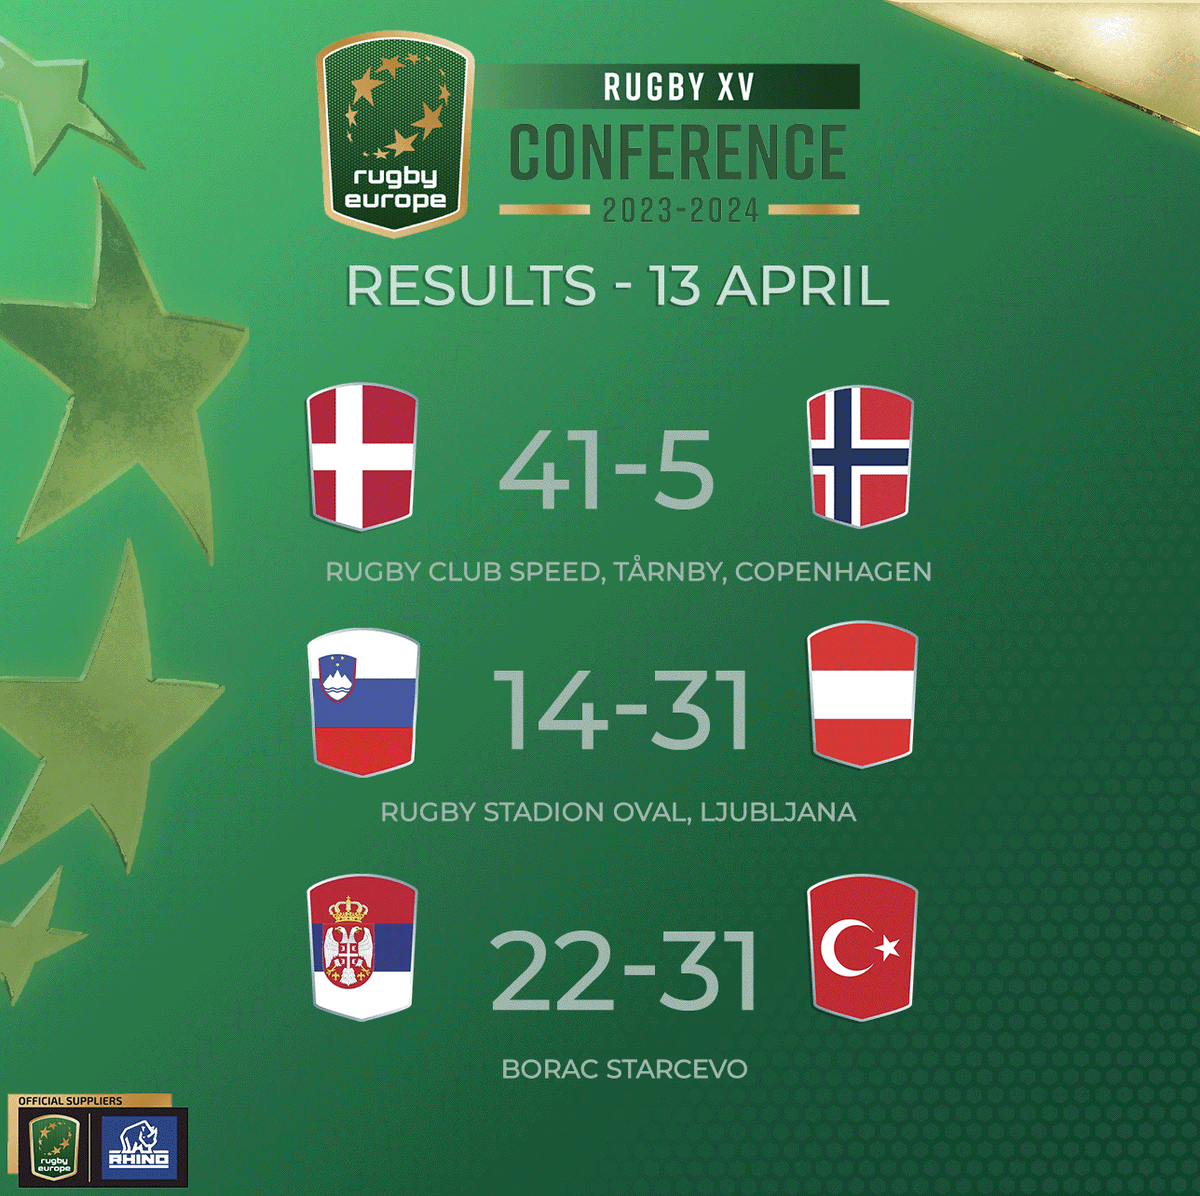 Wins for @RugbyDenmark, @rugbyaustria and @TRagbiFed in this afternoon's Conference matches. ⏪ Full replays of every game is available on rugbyeurope.tv